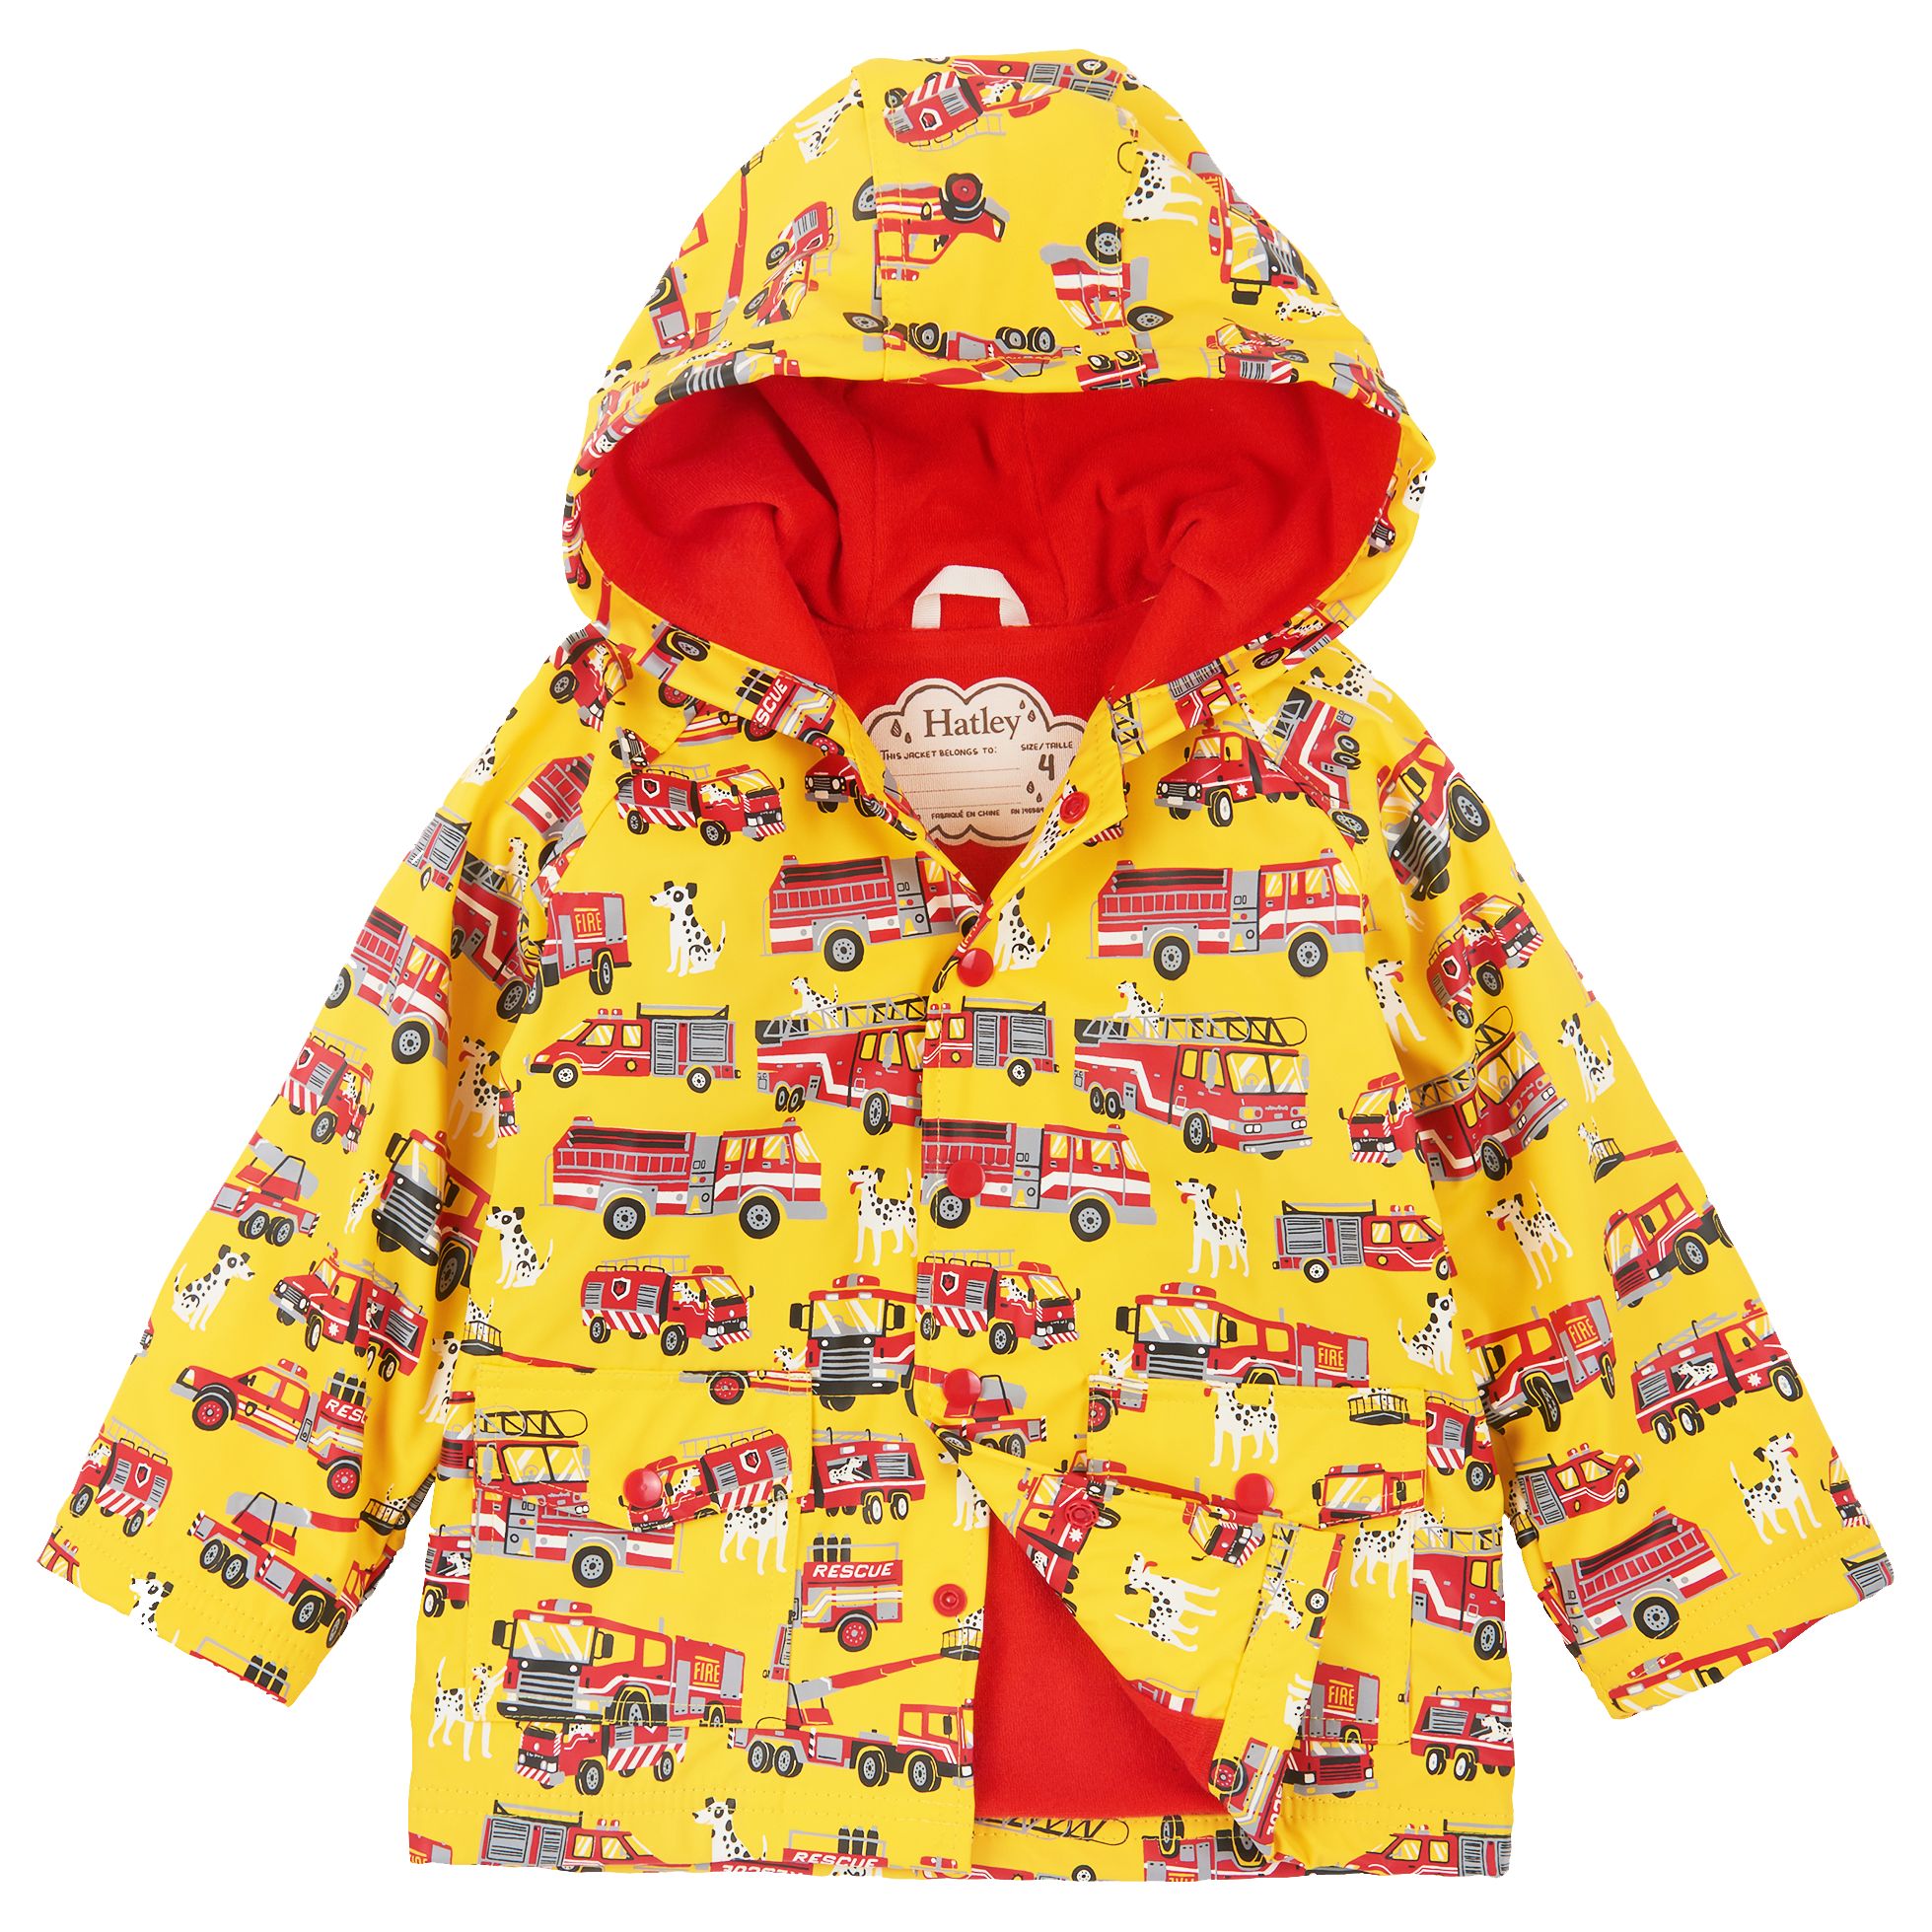 Hatley Boys' Fire Engines and Dalmatians Raincoat, Yellow/Red